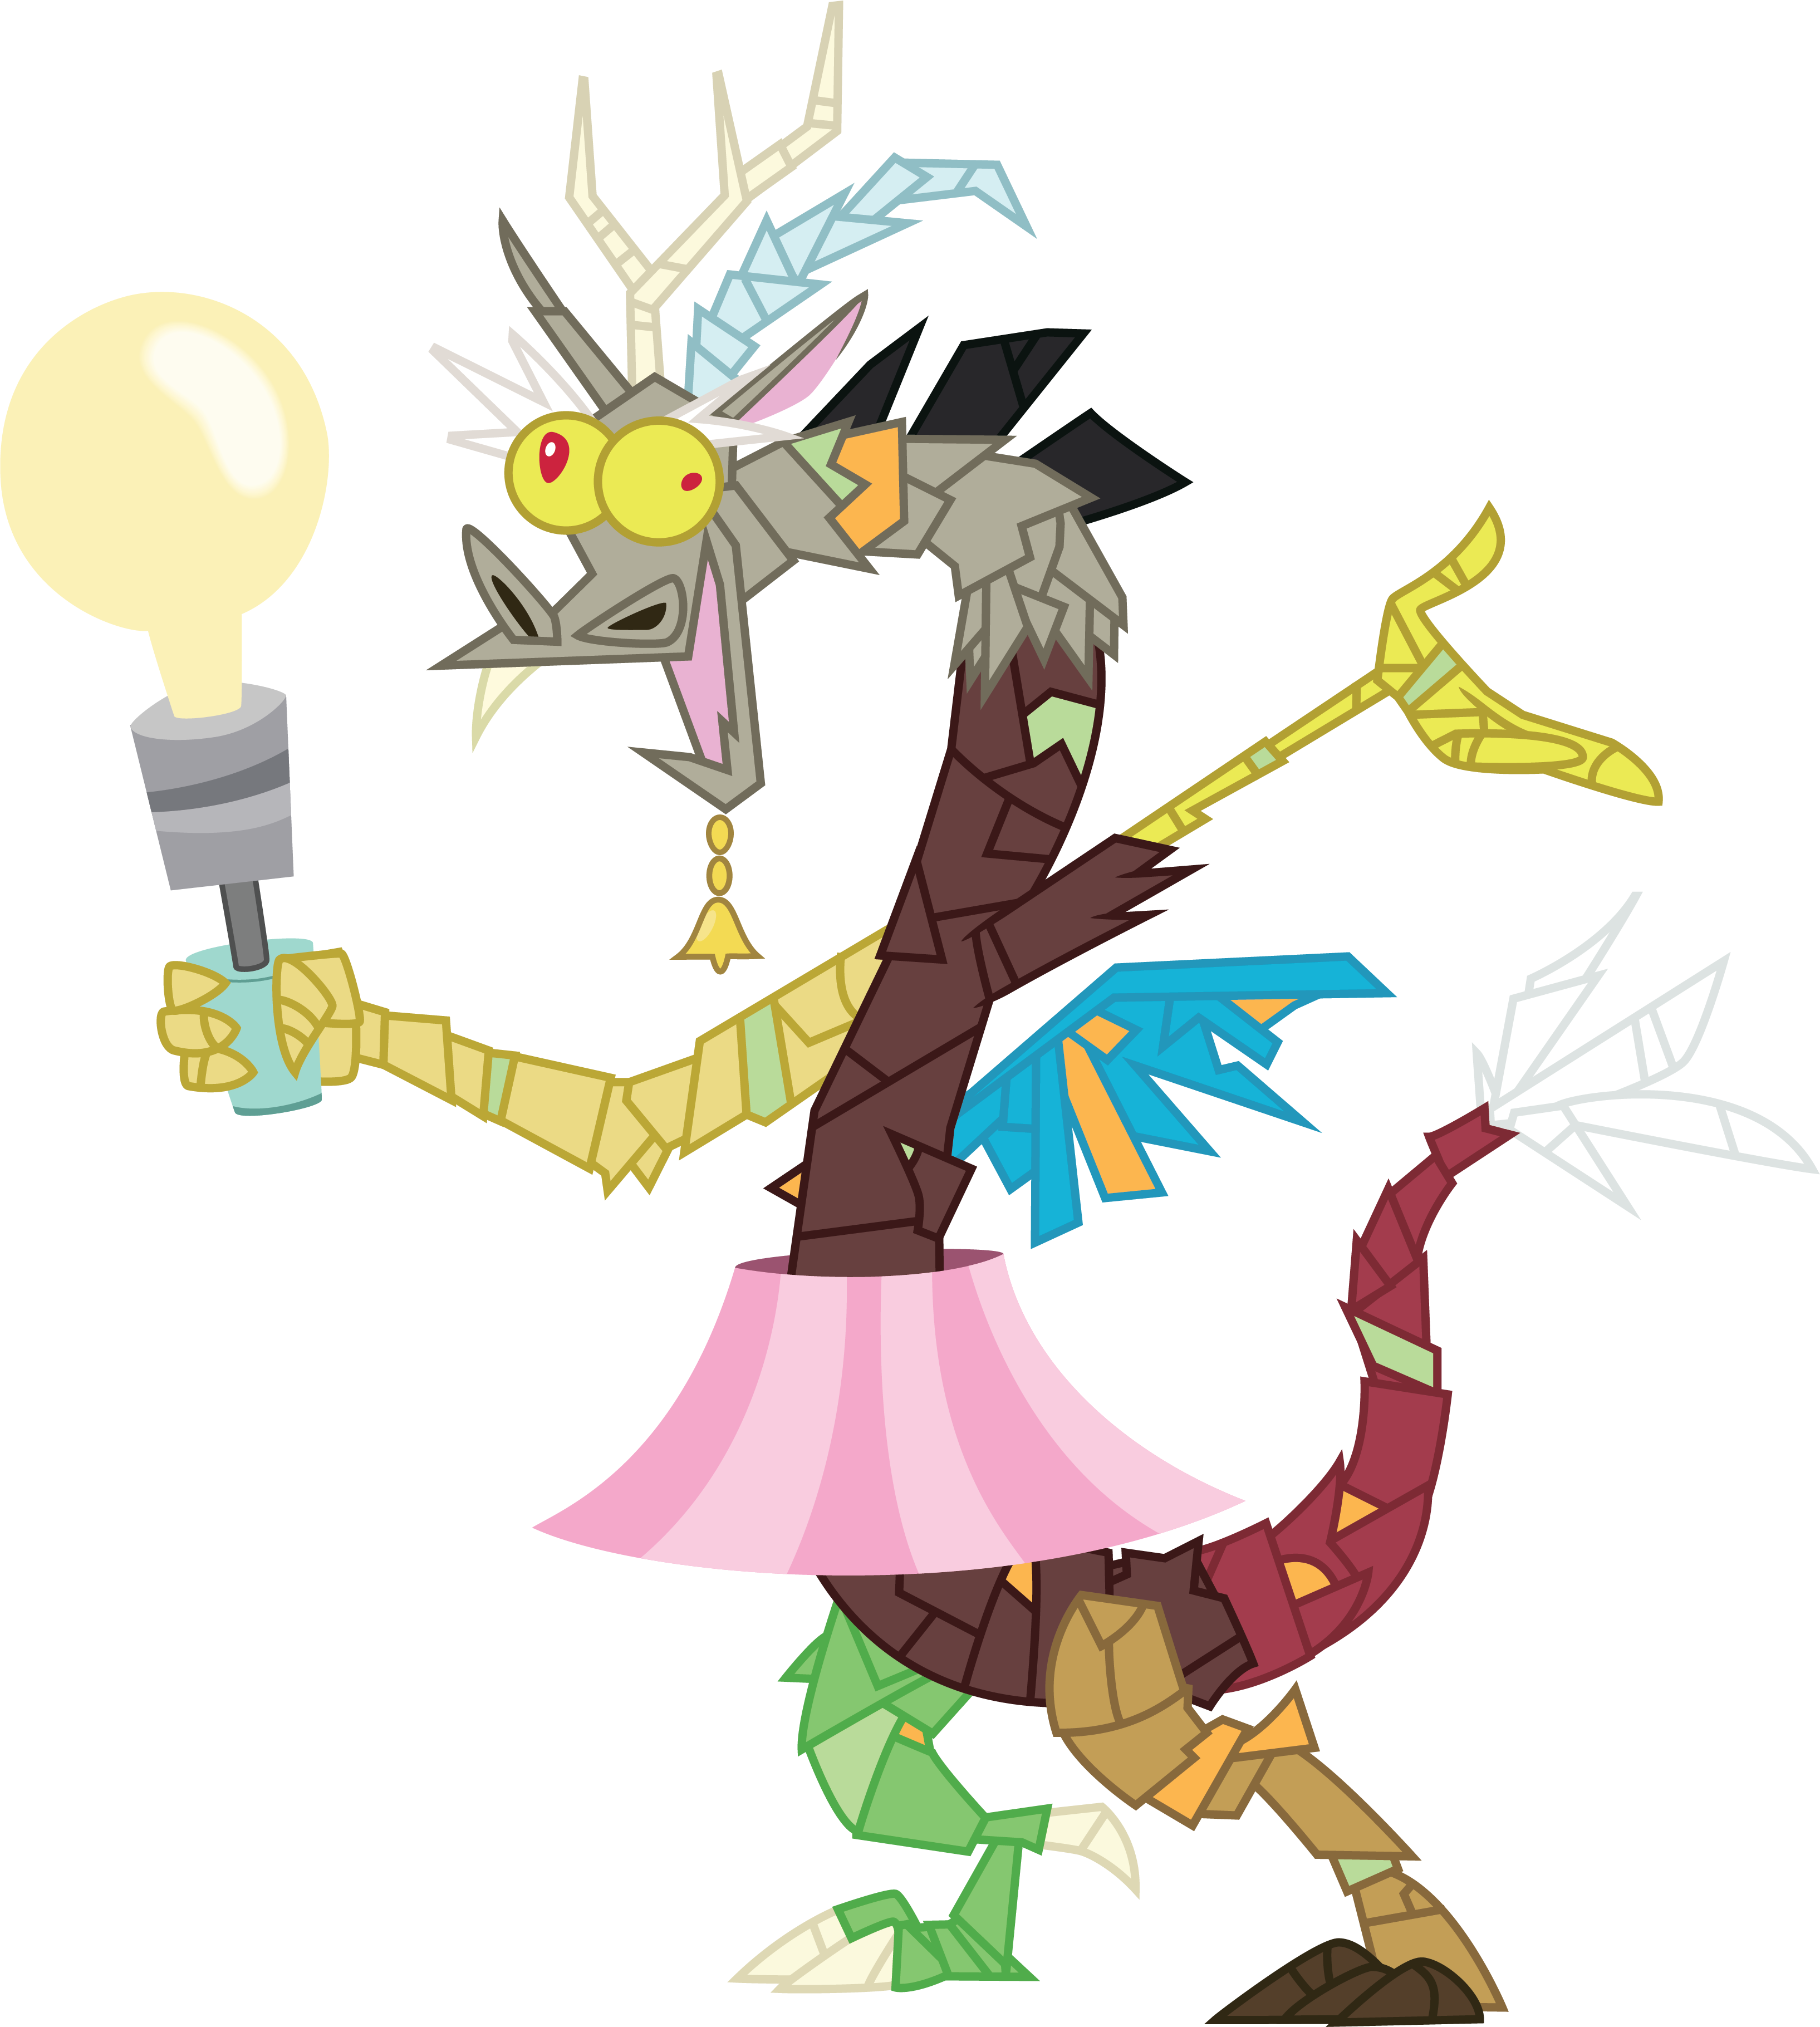 [Obrázek: discord_lamp_by_geonine-d5s54m5.png]